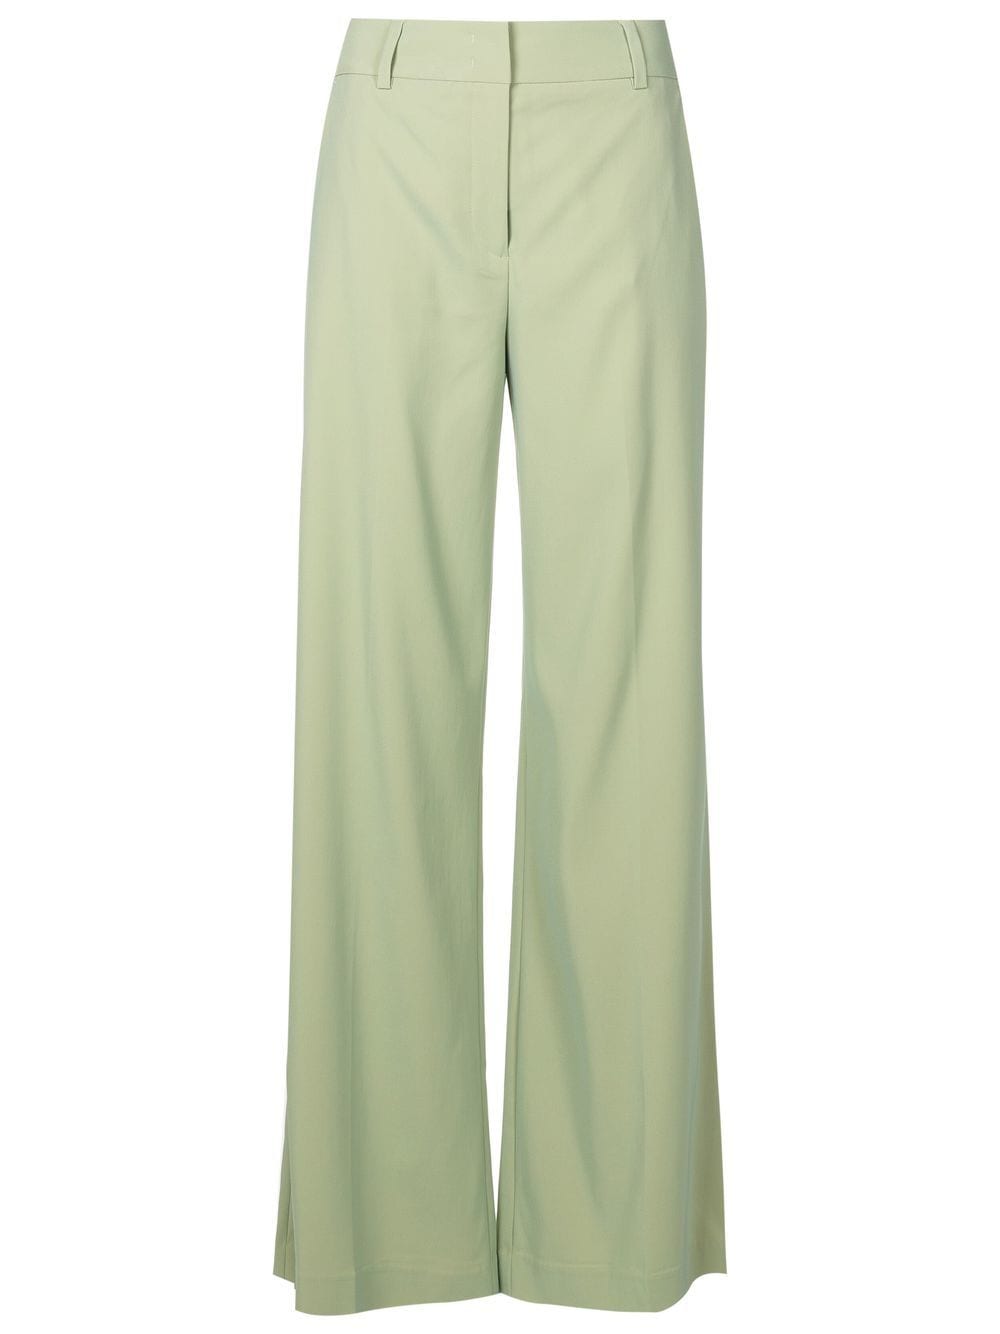 MISCI high-waisted wide trousers - Green von MISCI